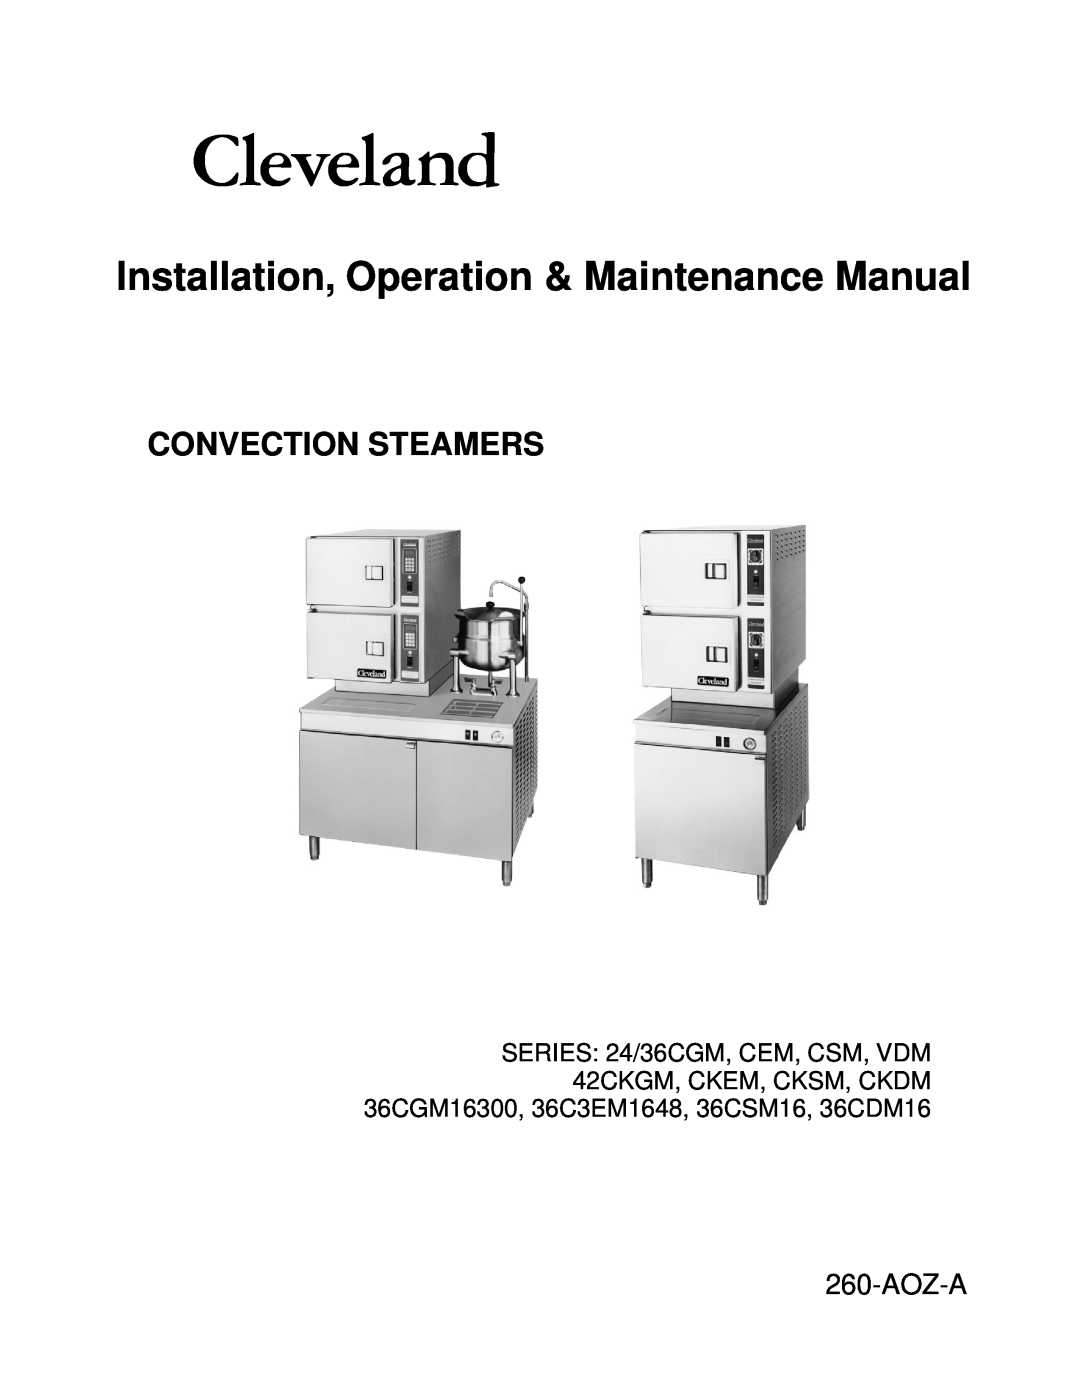 Cleveland Range 24/36CGM manual Installation, Operation & Maintenance Manual, Convection Steamers, Aoz-A 